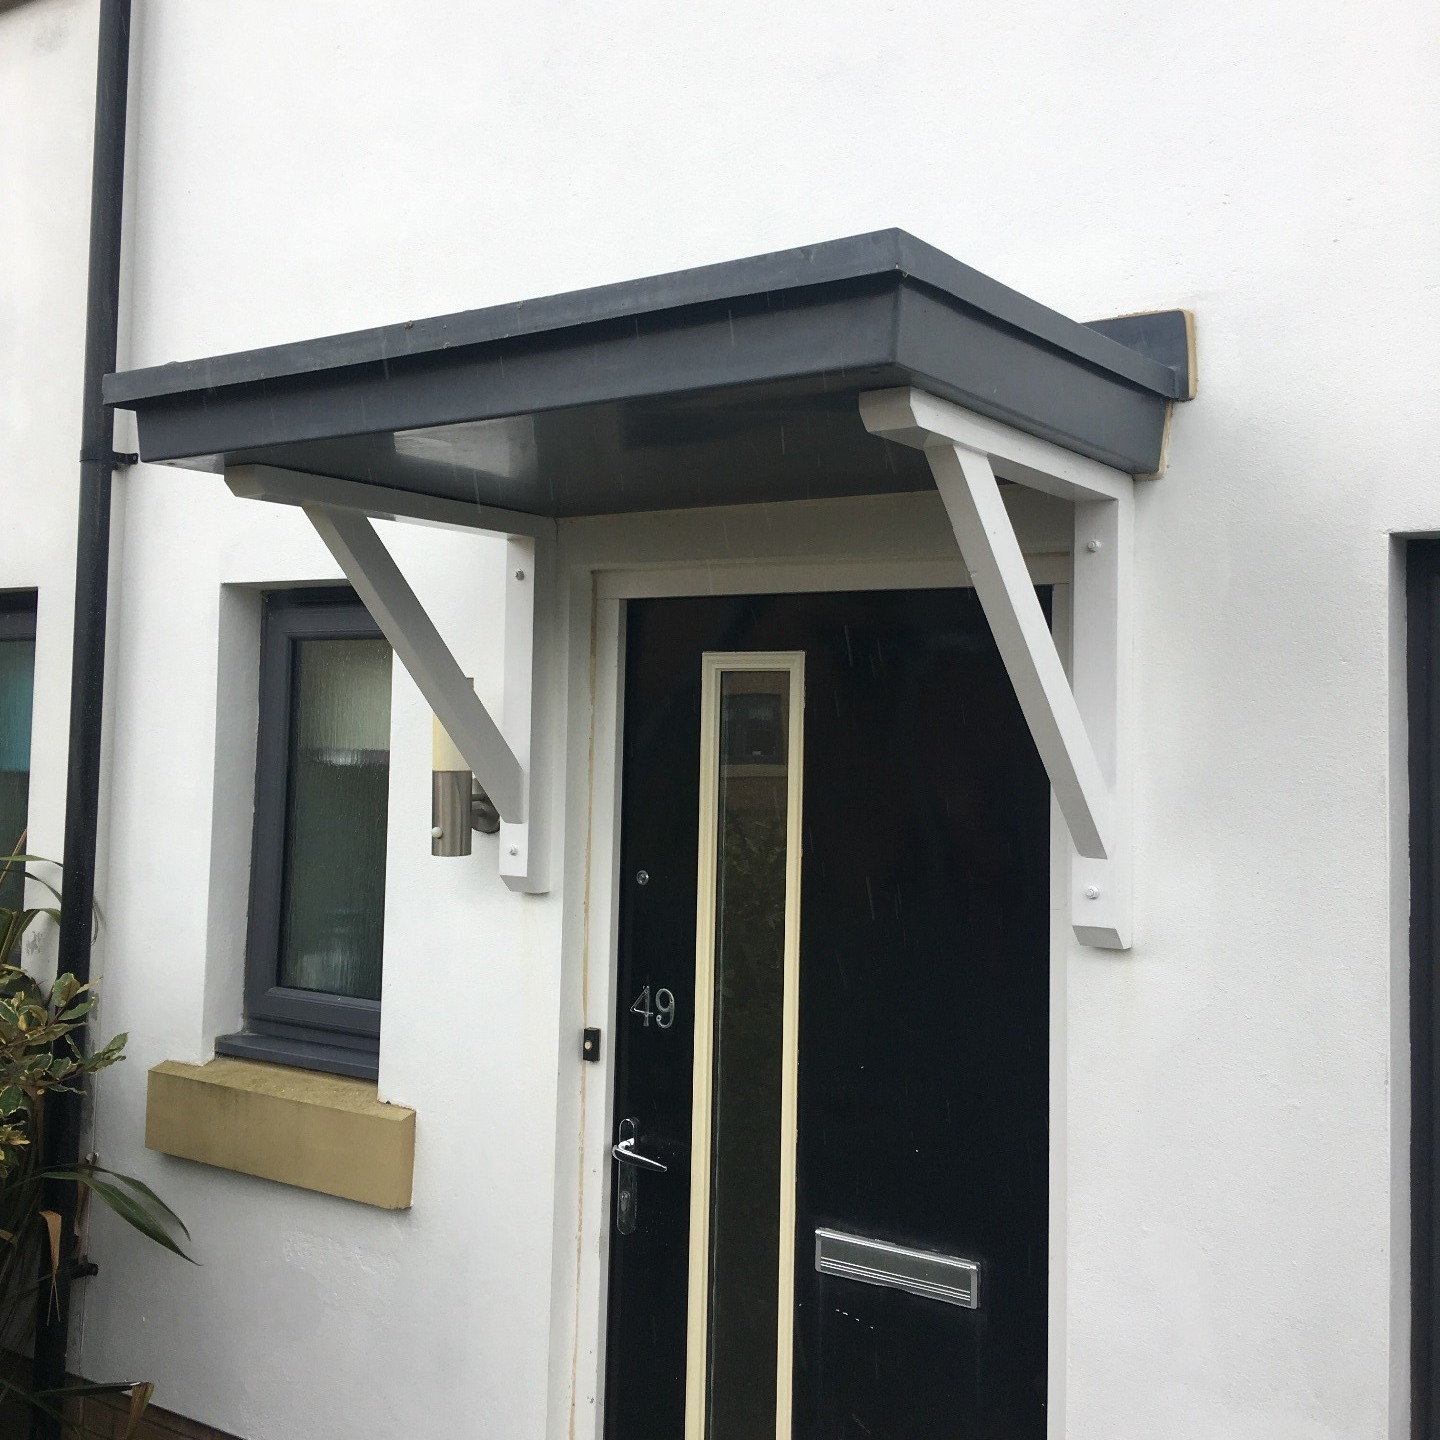 Flat roof door canopy with our Straight brace gallows brackets for support